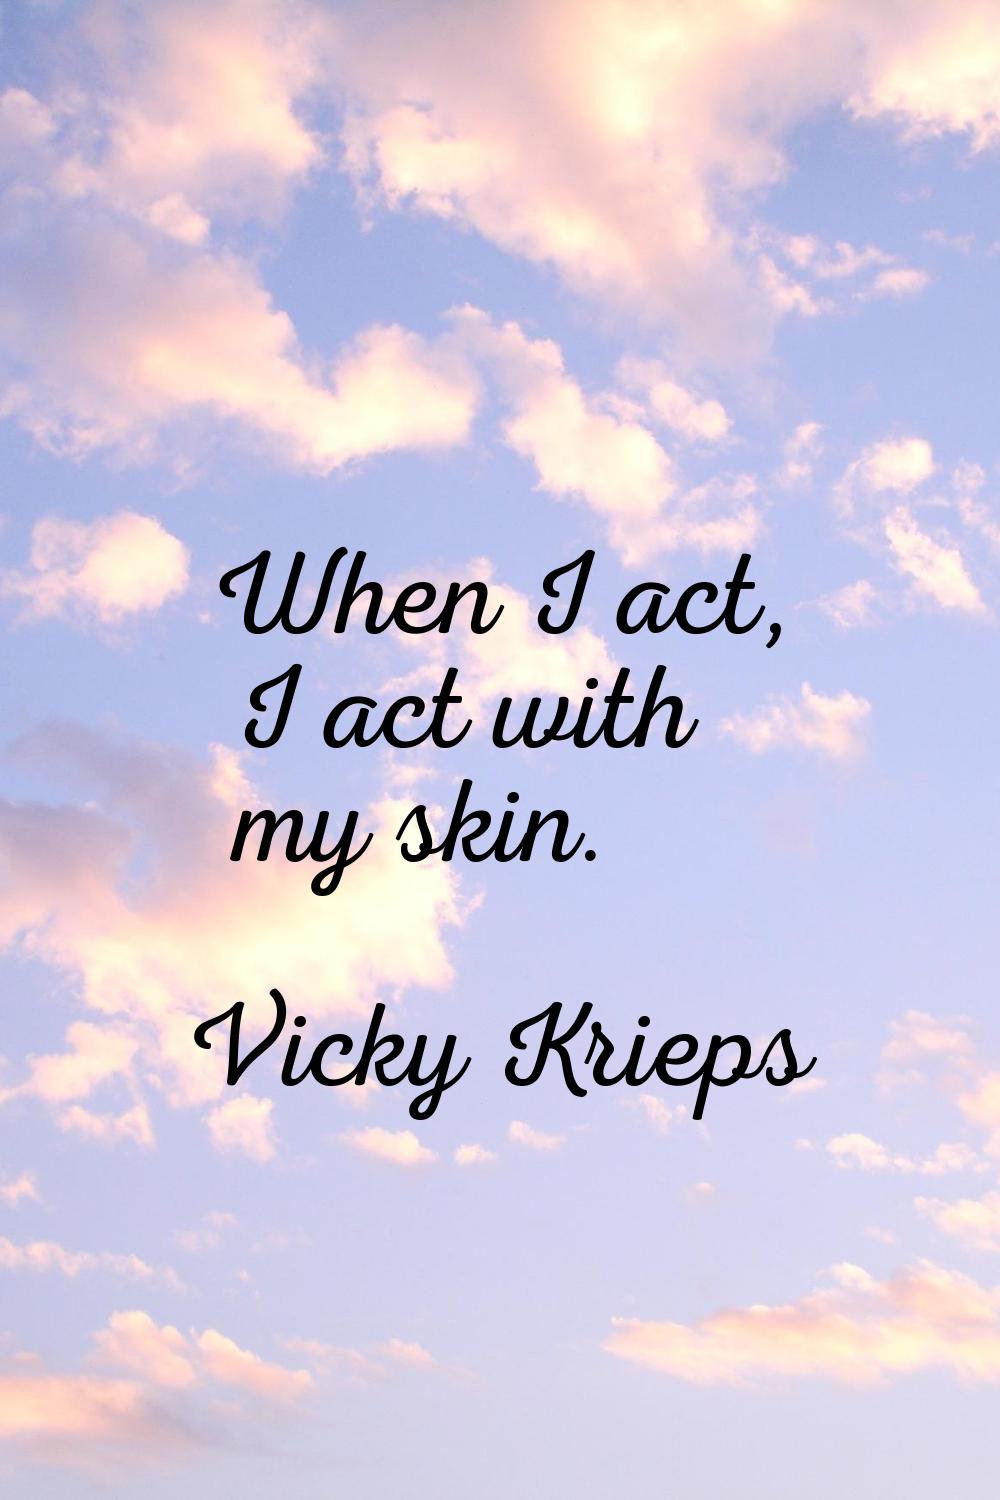 When I act, I act with my skin.